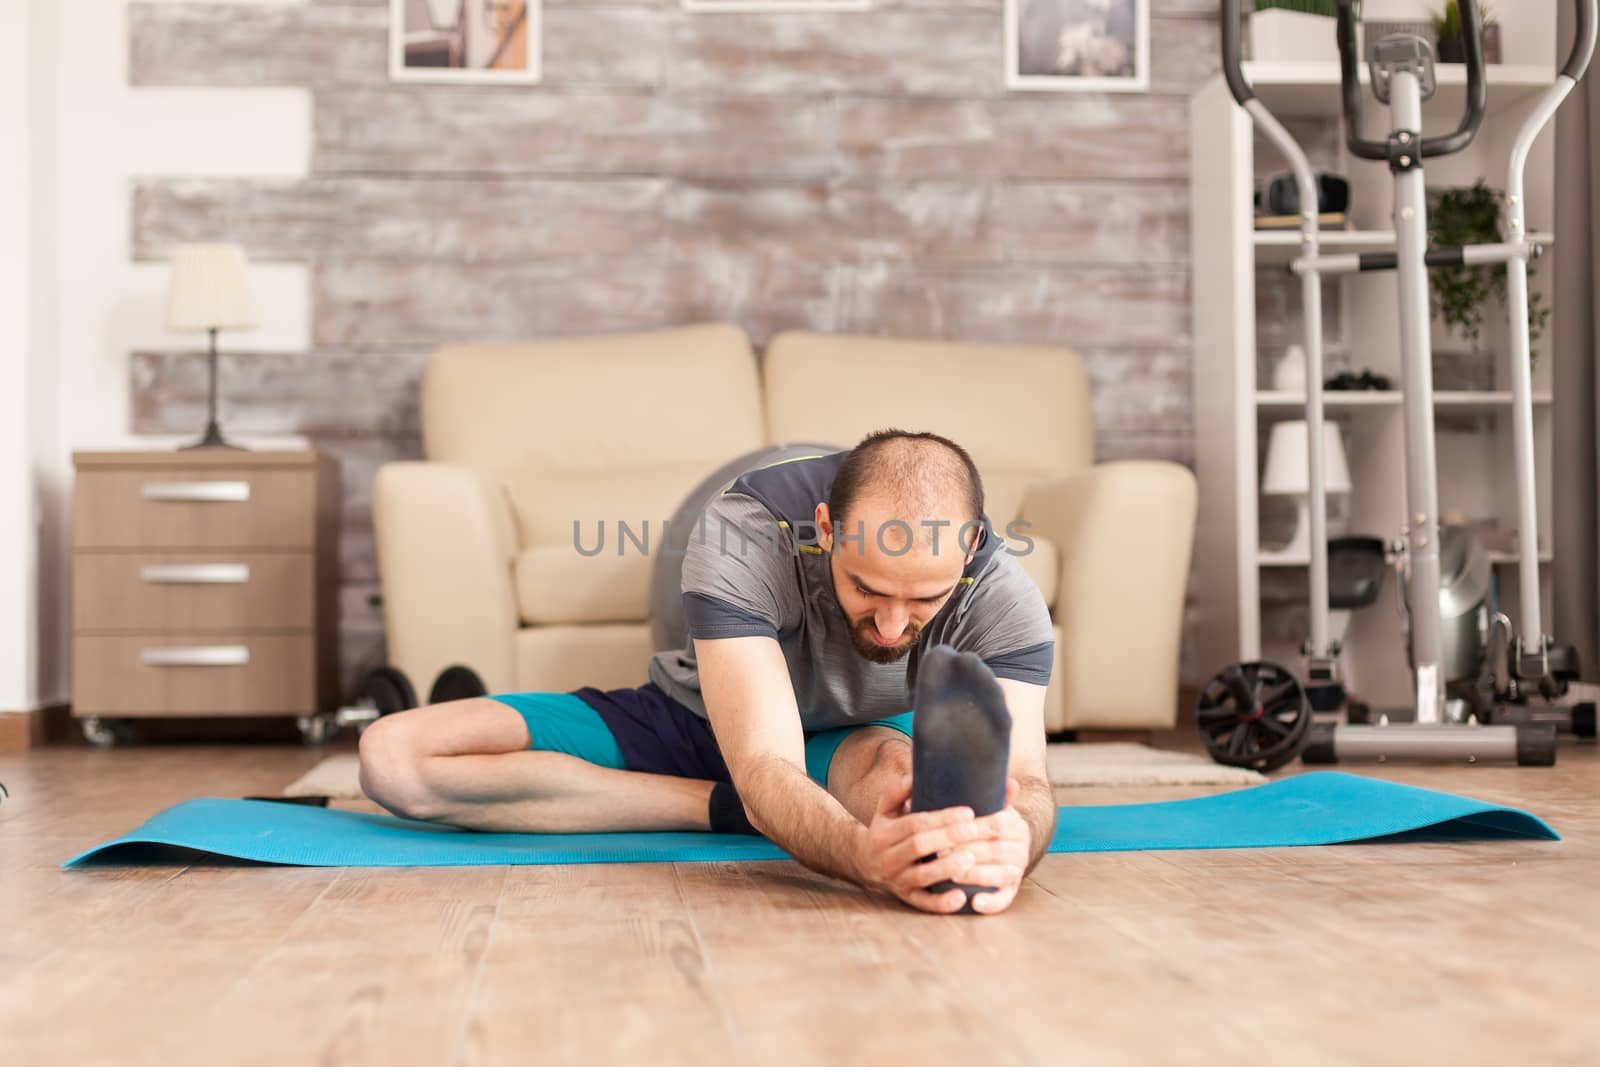 Athletic man stretching out before workout on yoga mat in home during global pandemic.